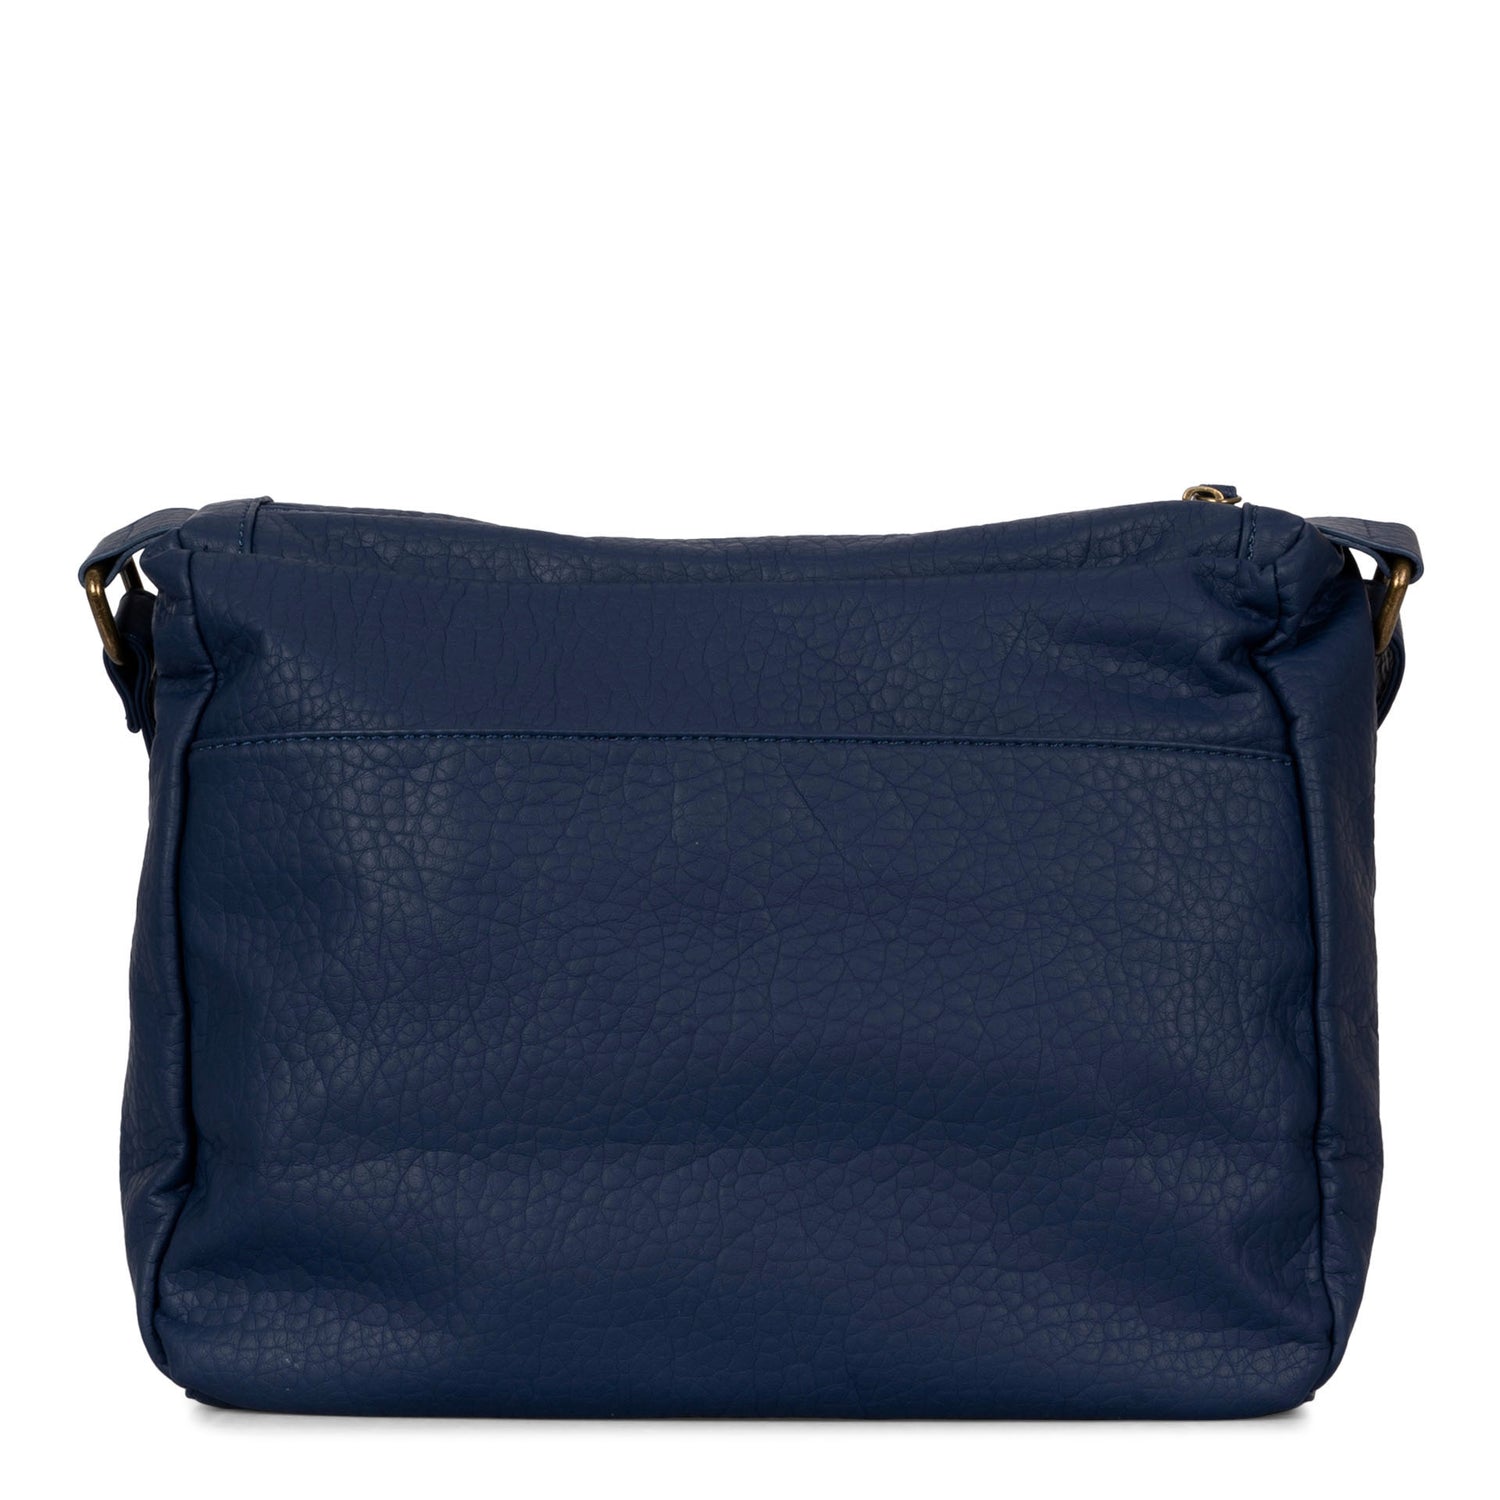 Backside of a women's navy crossbody bag called Pebbled from the brand Cargo on a white background.